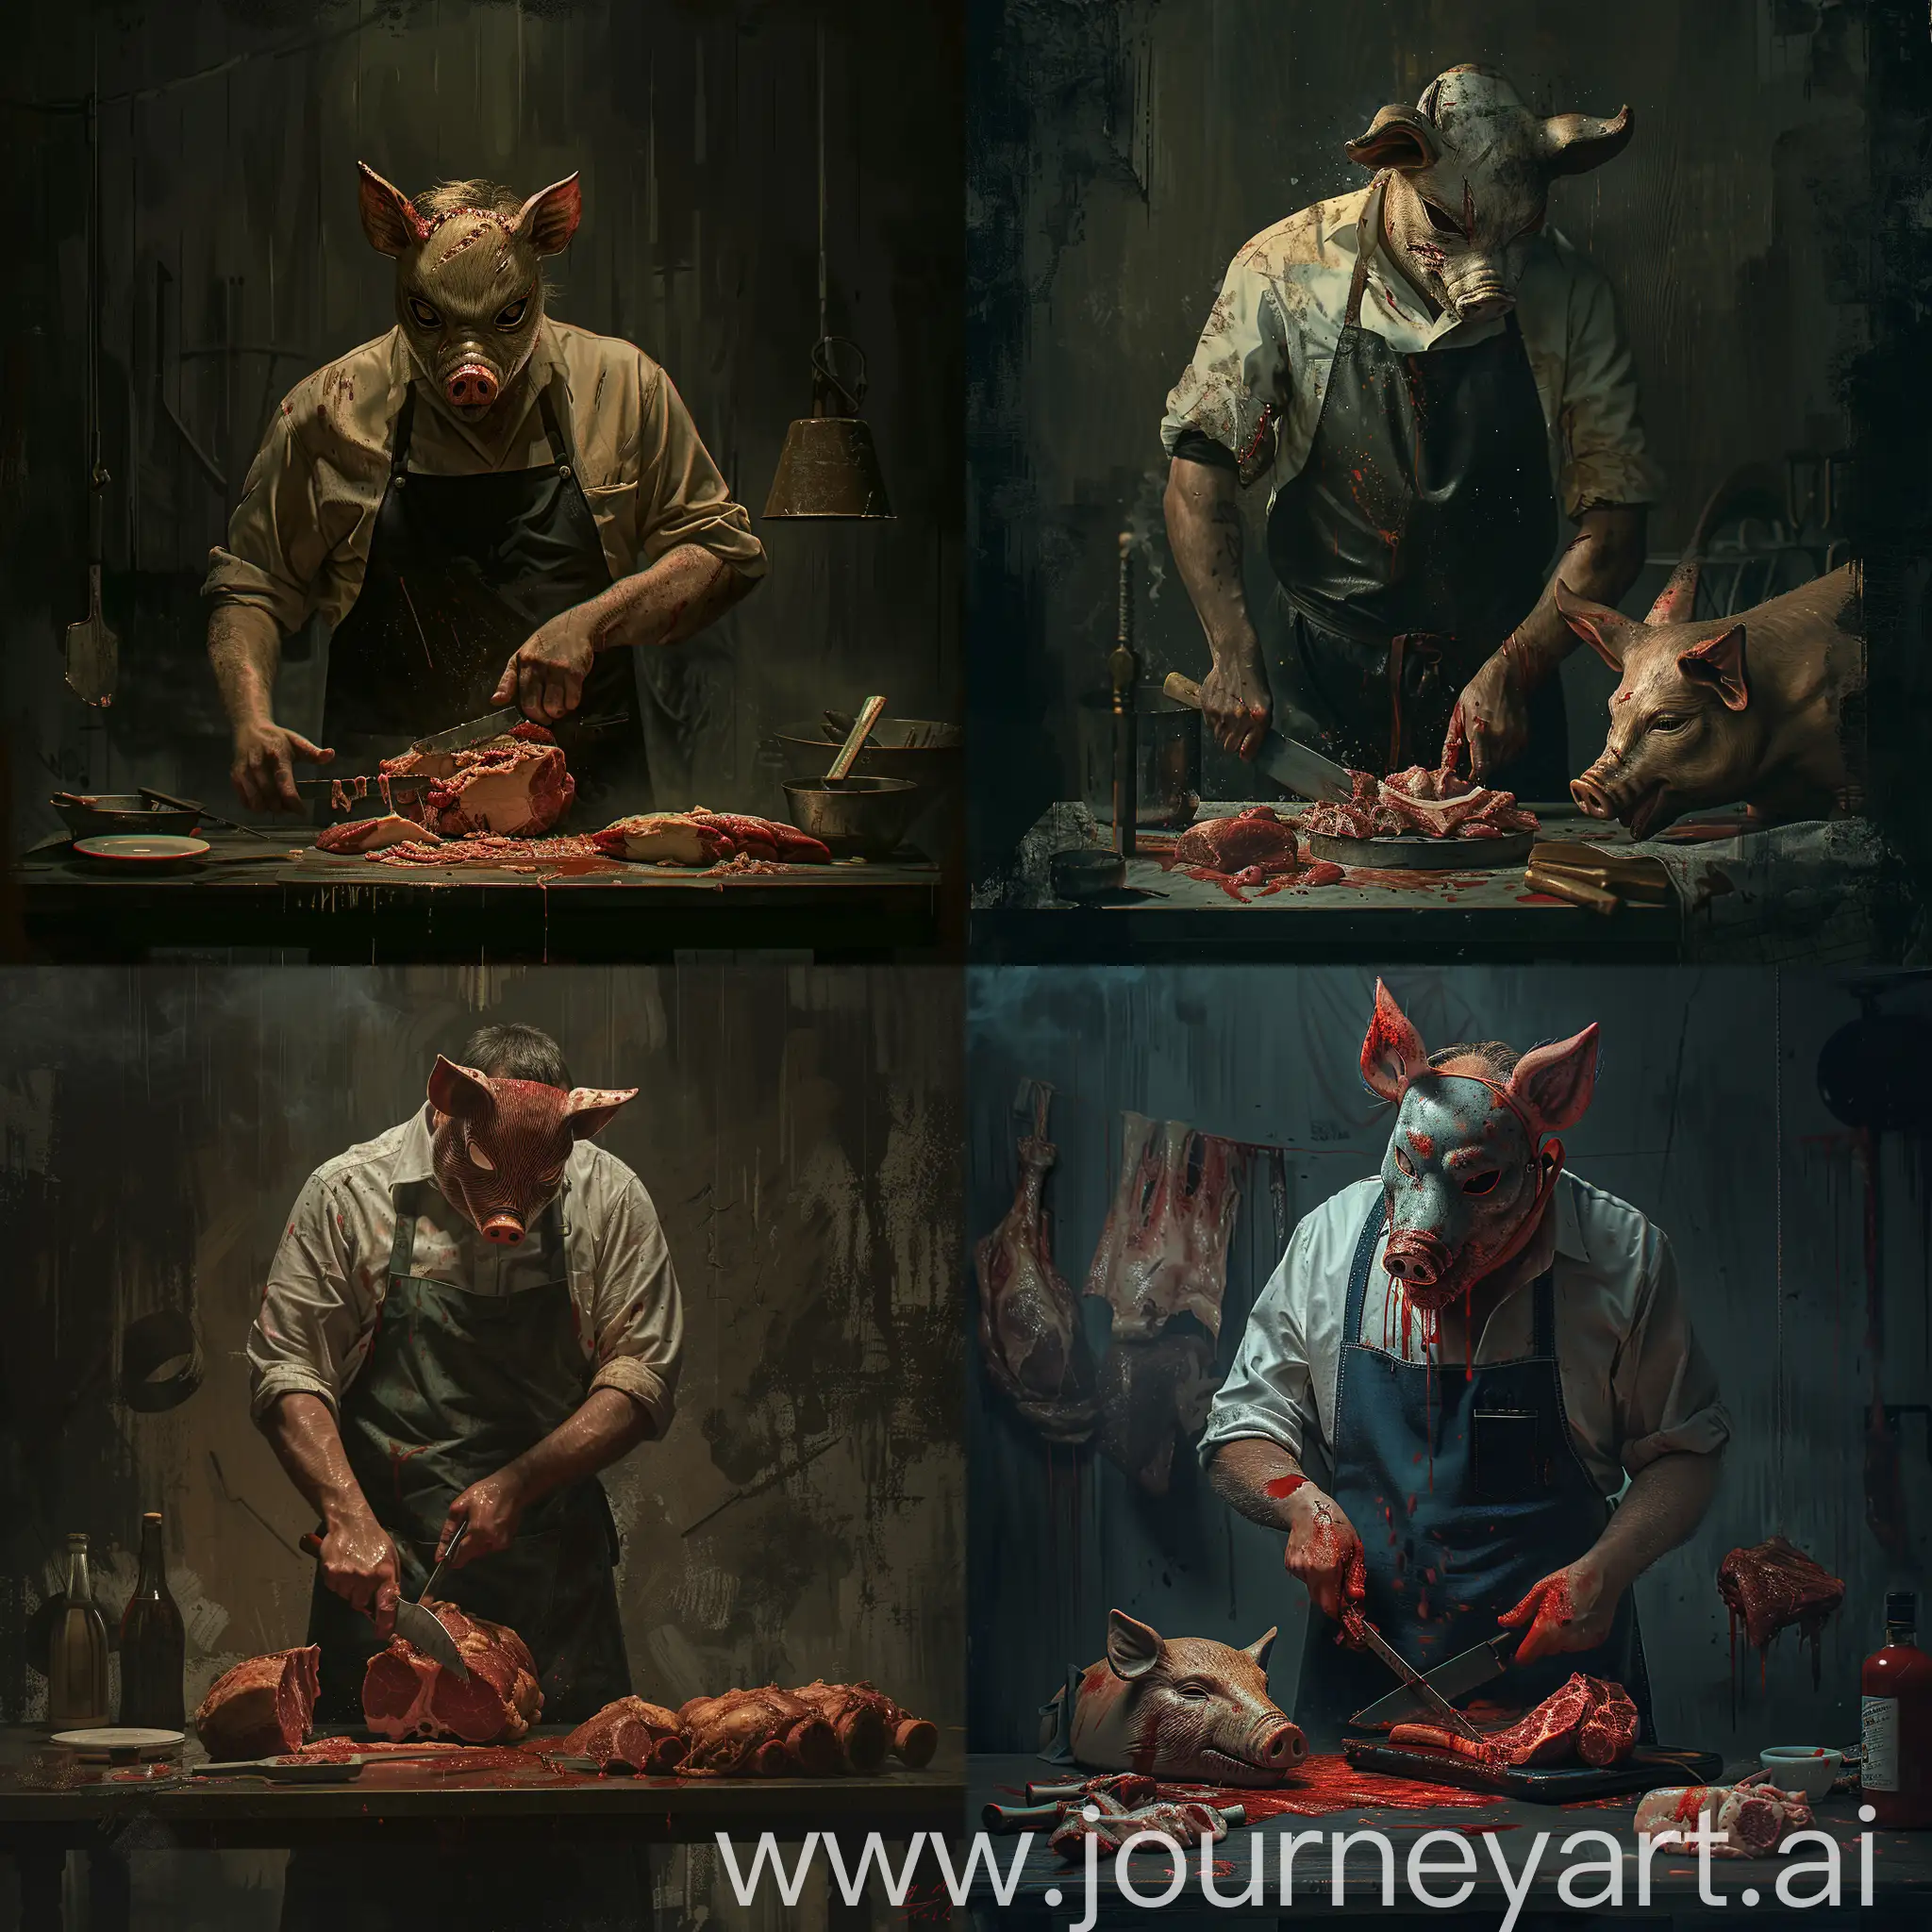 Creepy-Butcher-with-Pig-Mask-Slicing-Meat-Dark-Guillermo-del-Toro-Style-Digital-Art